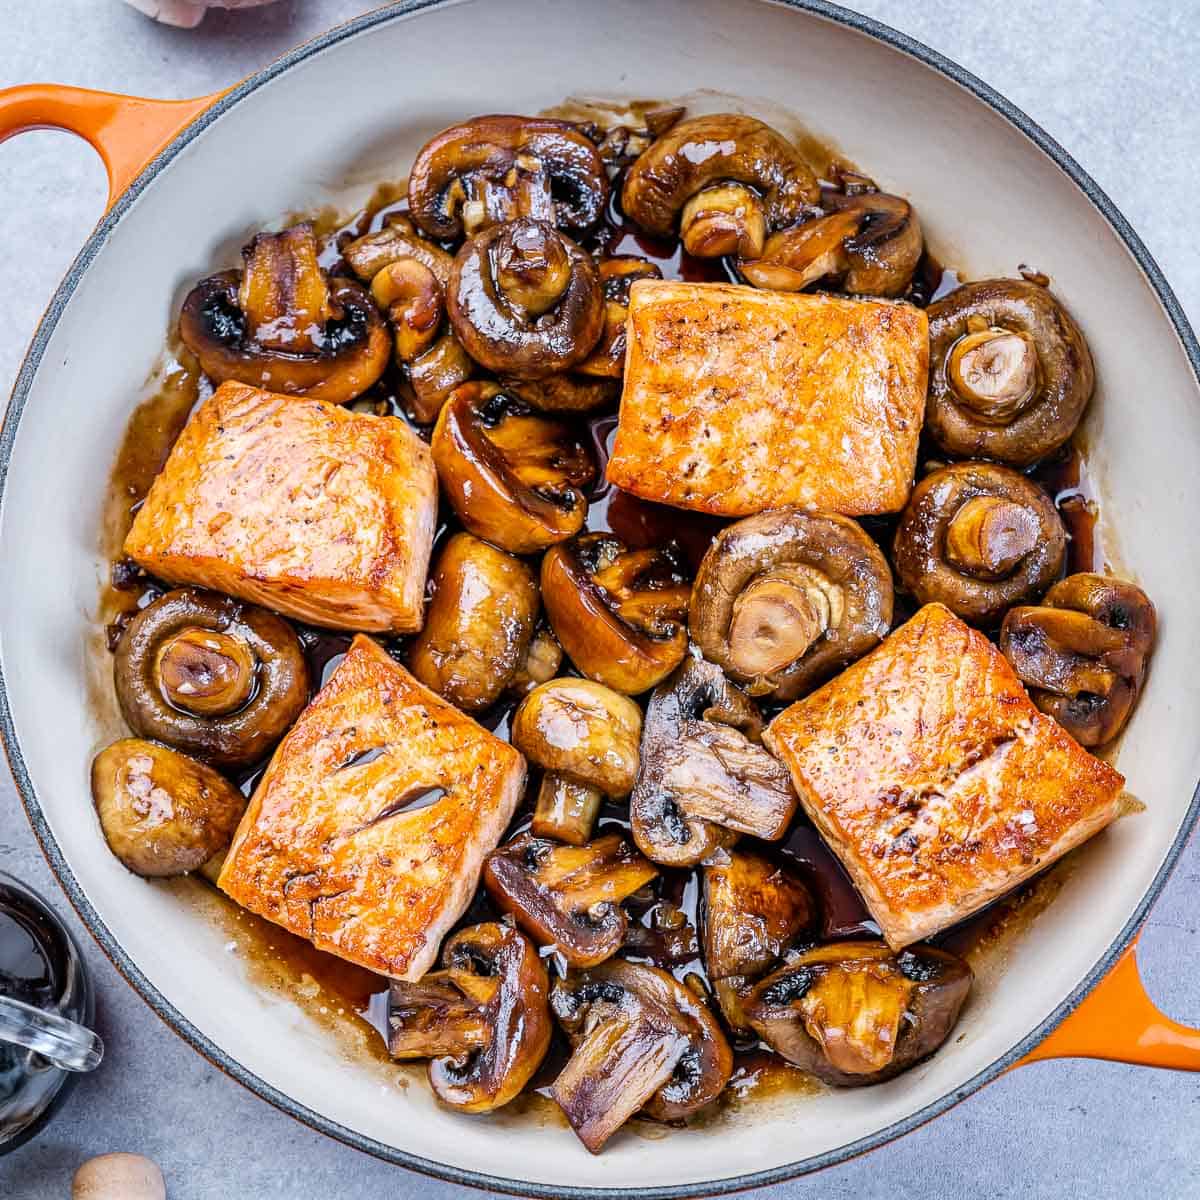 top view of pan seared salmon with mushrooms on an orange skillet